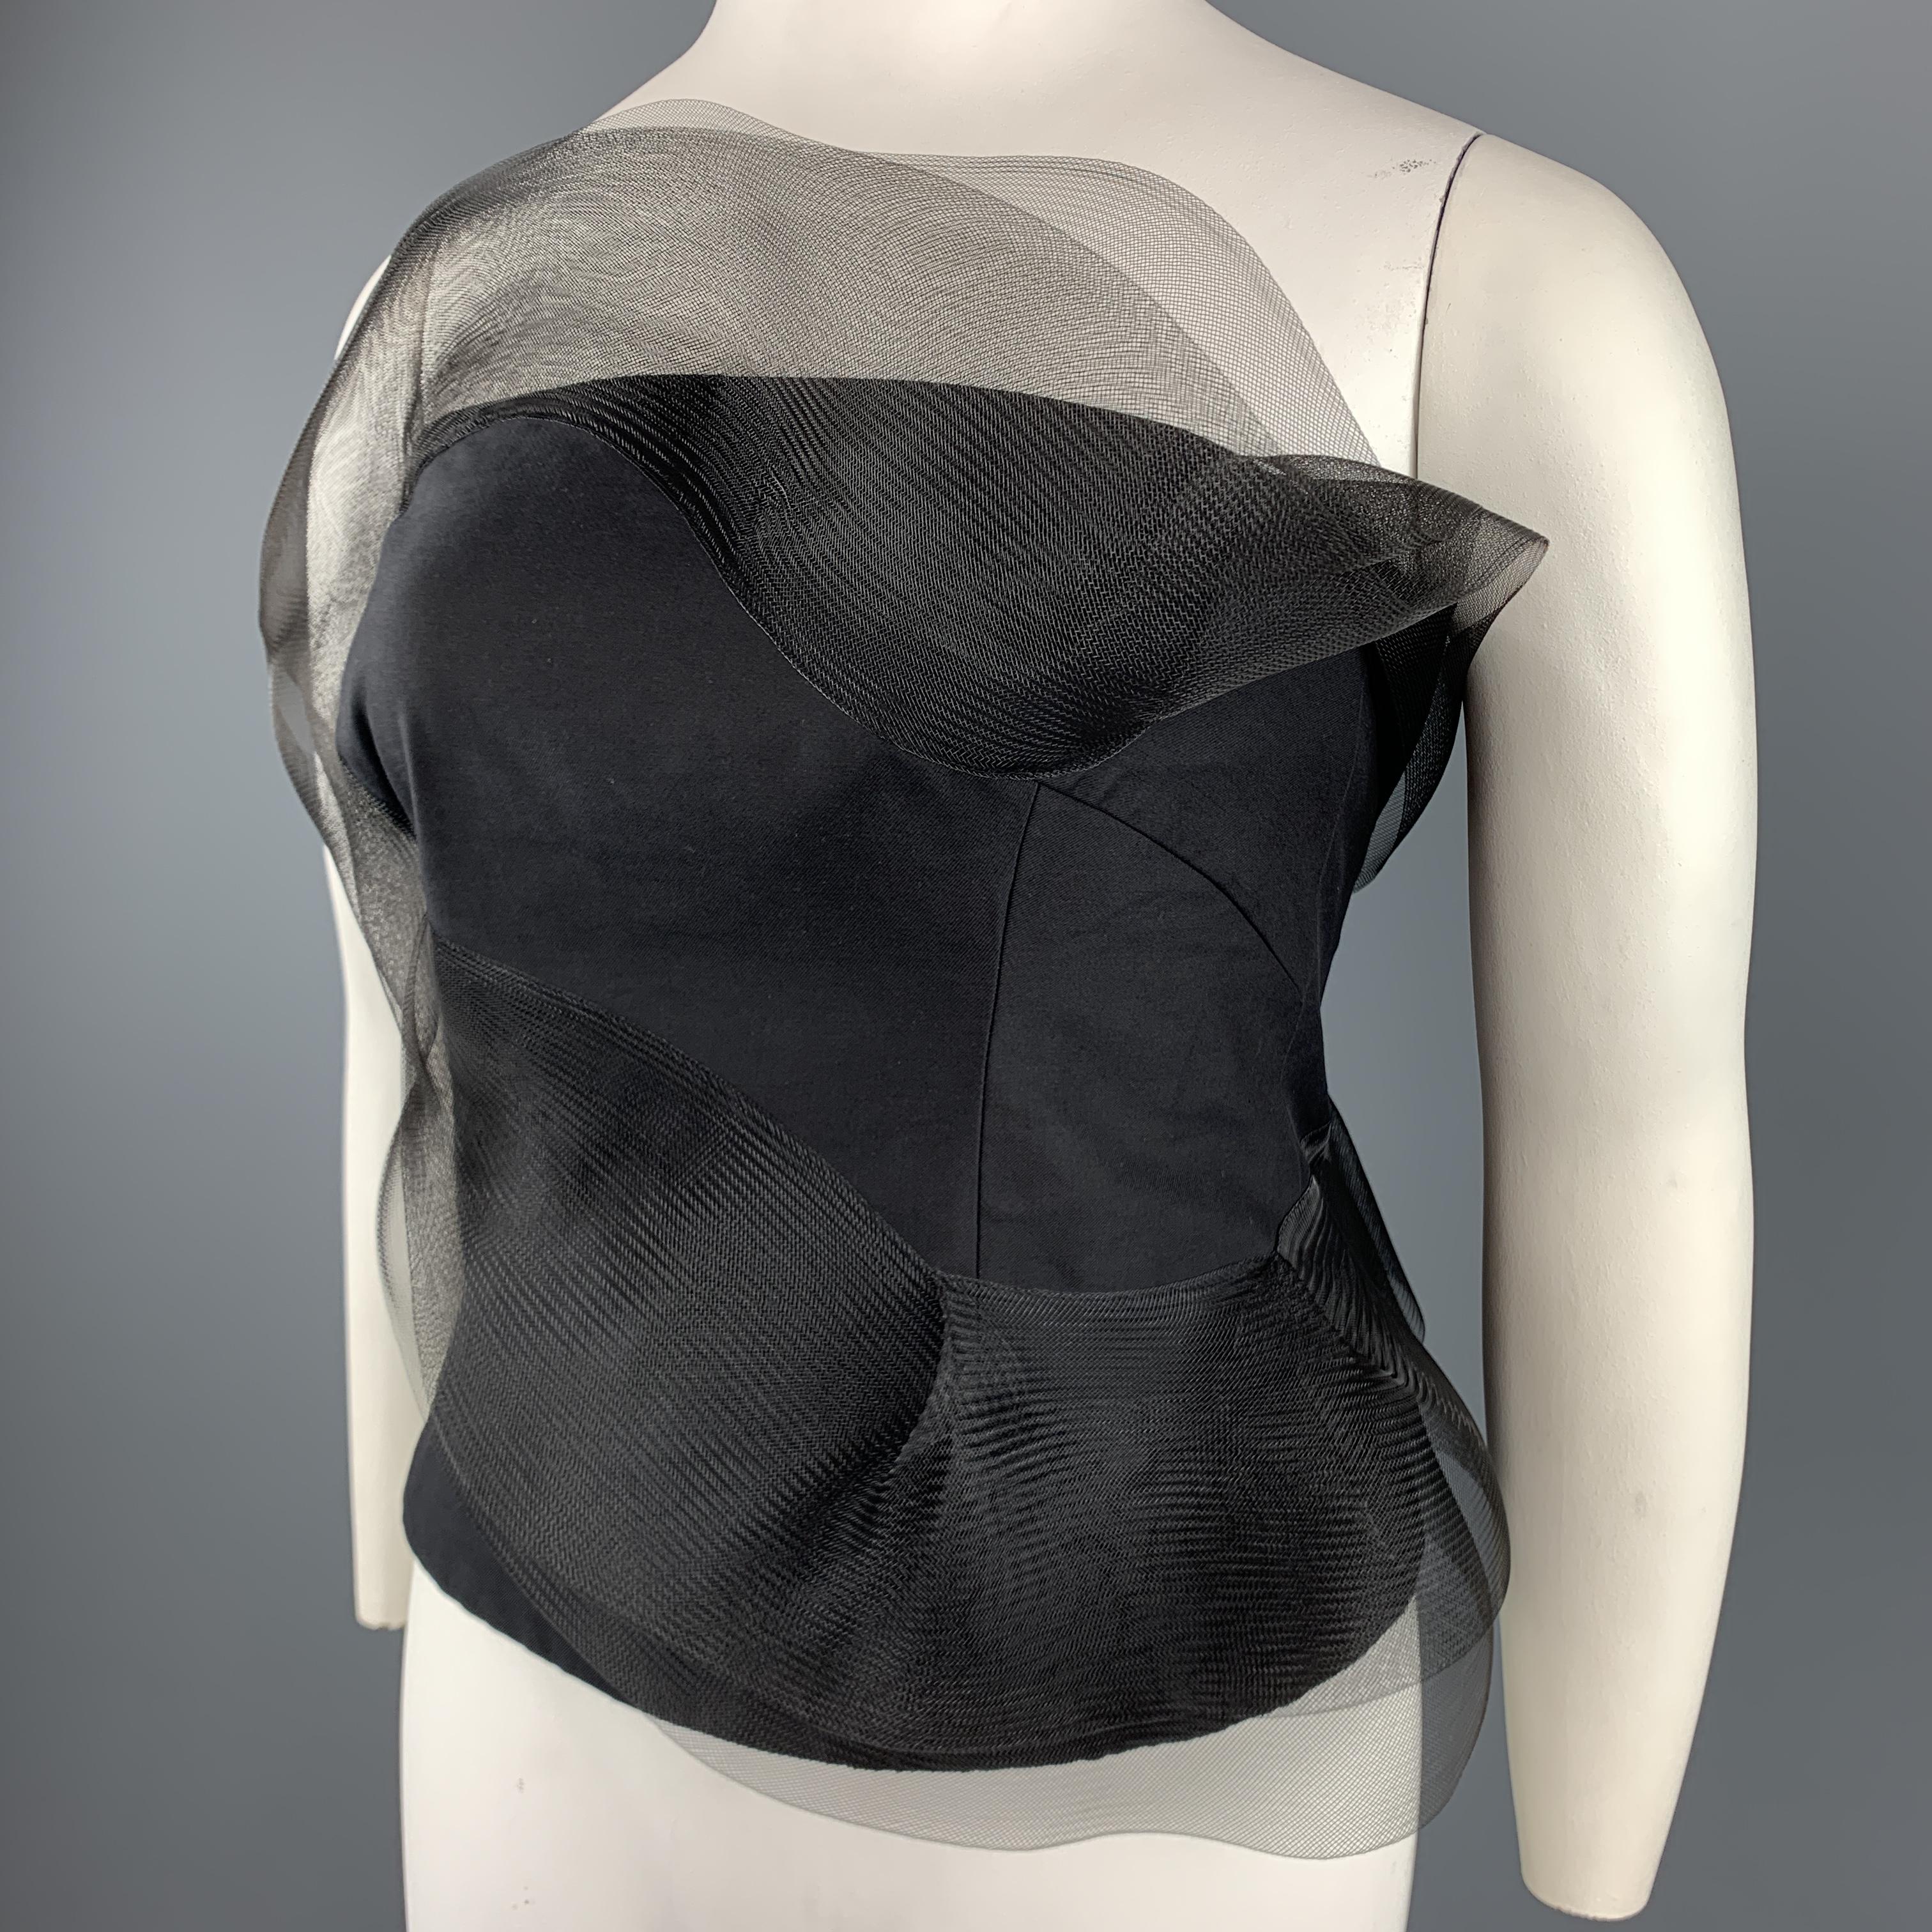 AKRIS bustier top comes in a cotton silk blend twill with a strapless neckline and asymmetrical tulle mesh ruffle accent throughout. 

Excellent Pre-Owned Condition.
Marked: 12

Measurements:

Bust: 39 in.
Waist: 34 in.
Length: 15.5 in.